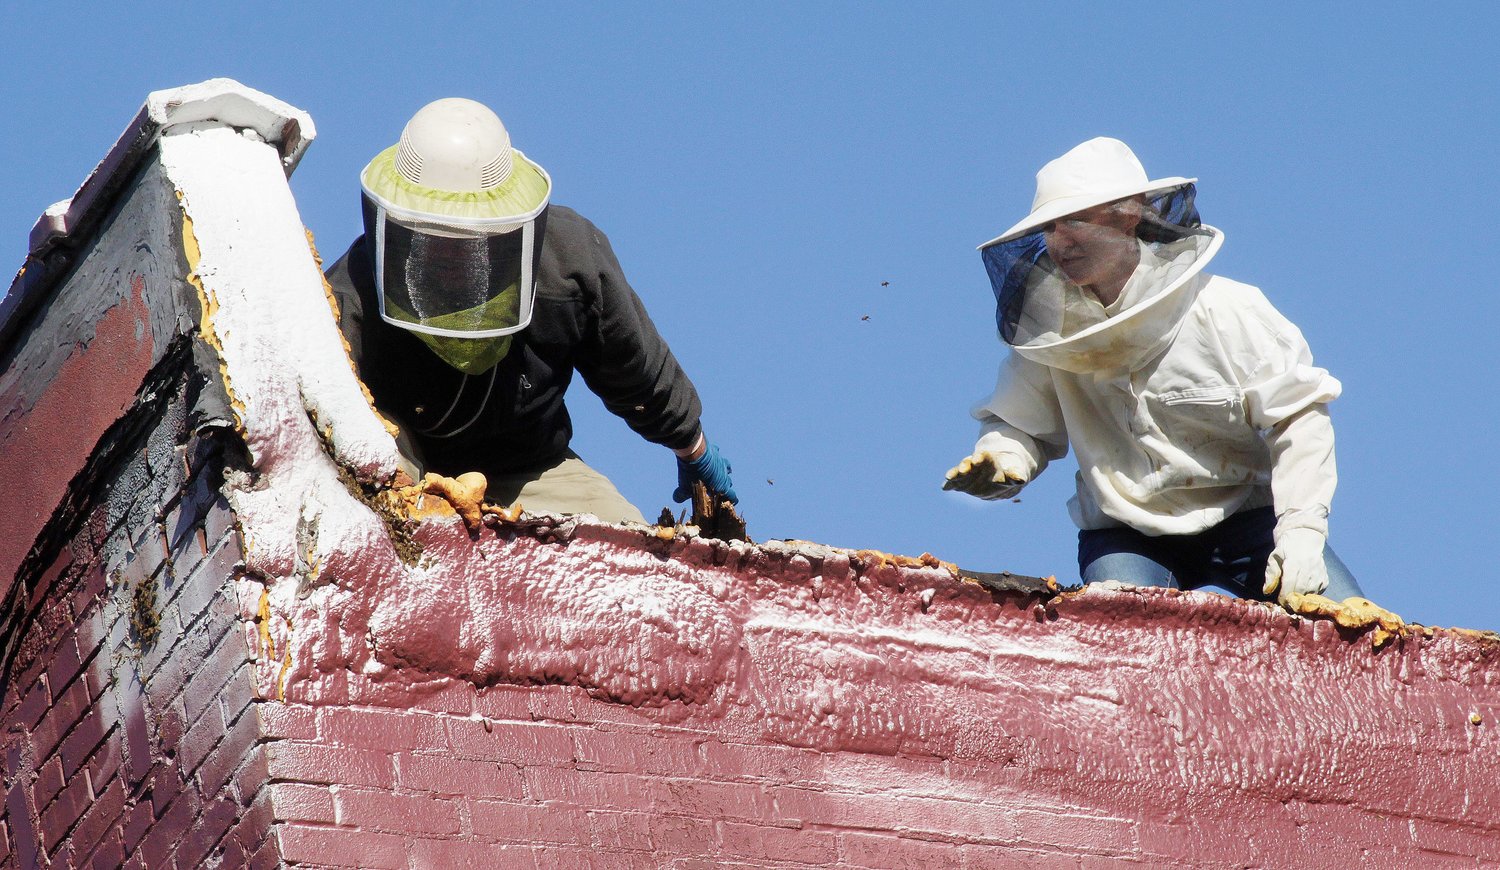 Dr. Mark Lajeunesse, left, and Tori Brumbaugh of Moberly had been on the roof of Lajeunesse's chiropractor and health fitness business located at 211 N. Clark St. the evenings of June 21-22 dressed in protective gear as they work to relocate a large size bee hive. Lajeunesse and Brumbaugh had been attempting to capture the hive's Queen bee as well as many bees as possible and safely transport them to another remote site.